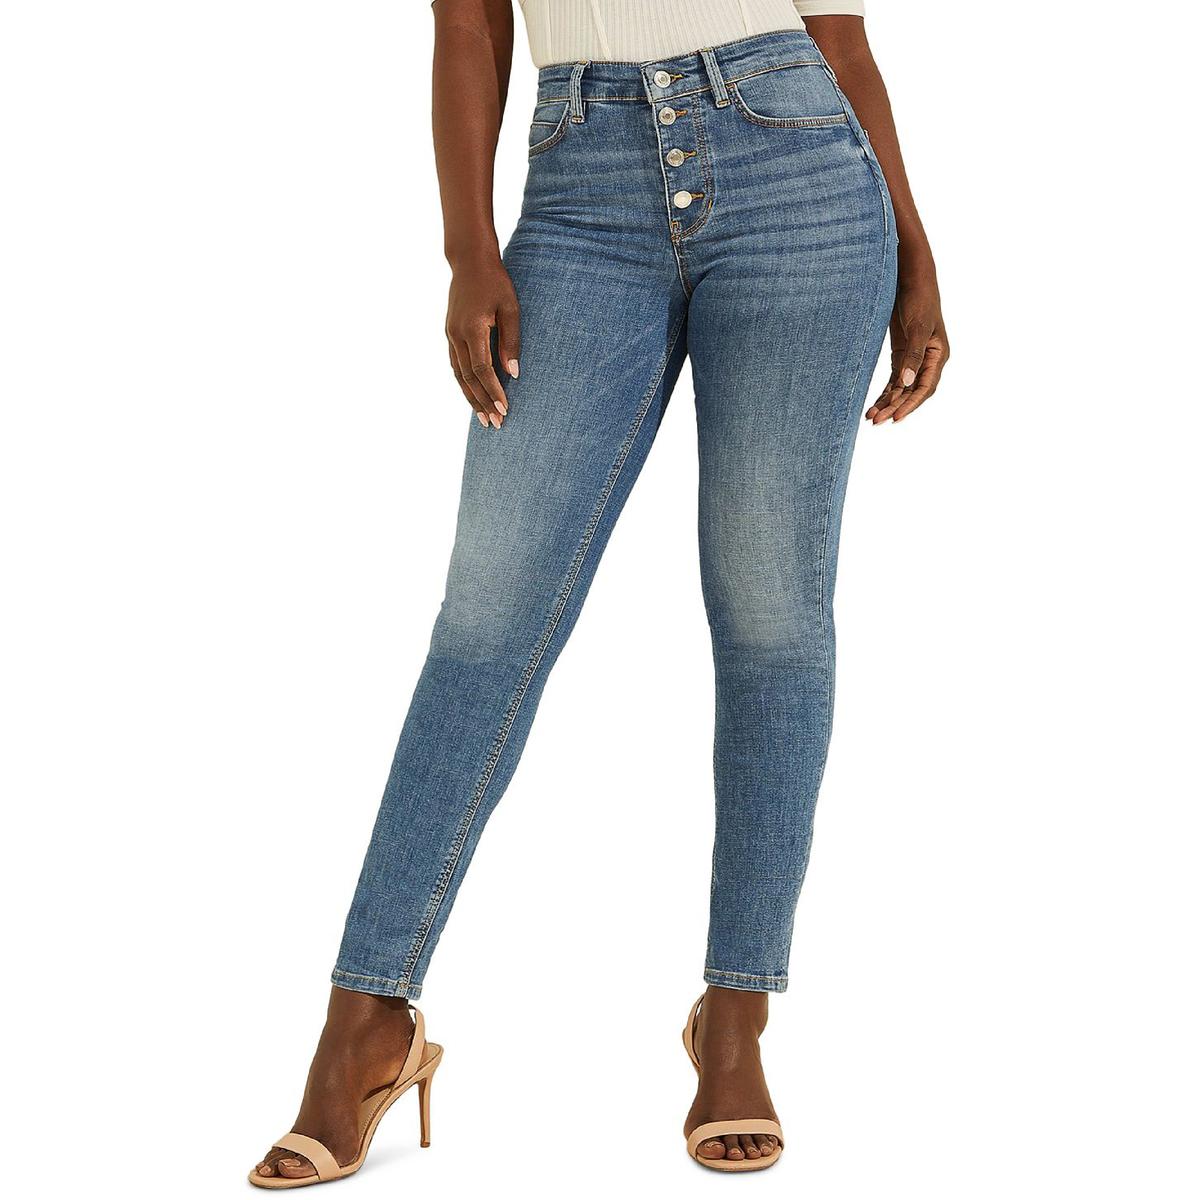 Guess Womens Denim Ankle Skinny Jeans